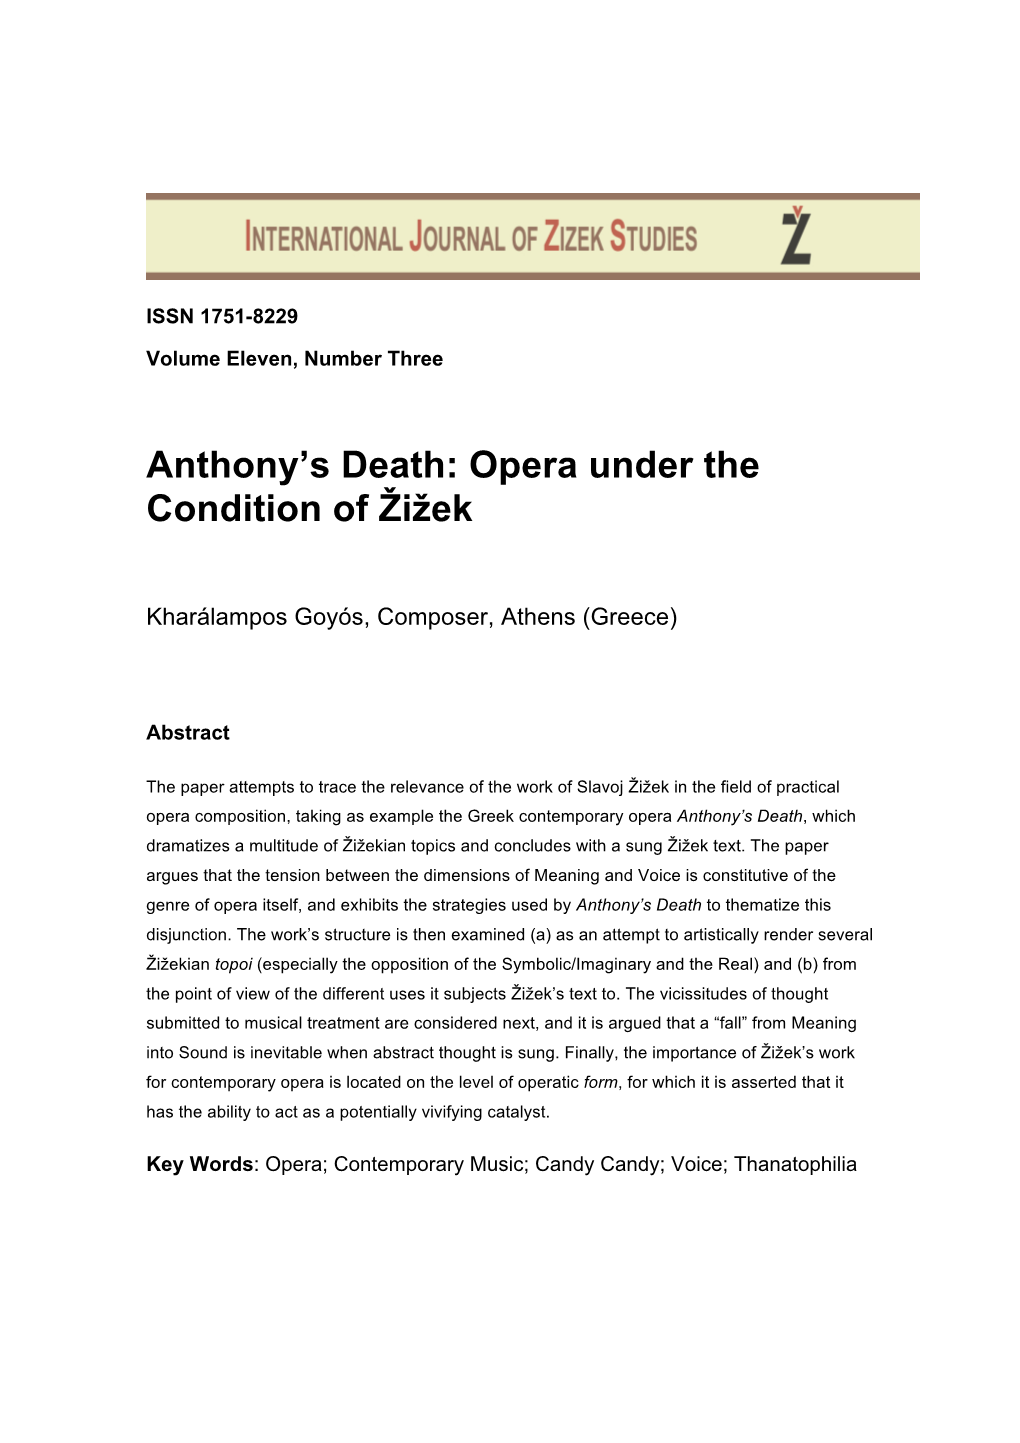 Anthony's Death: Opera Under the Condition of Žižek